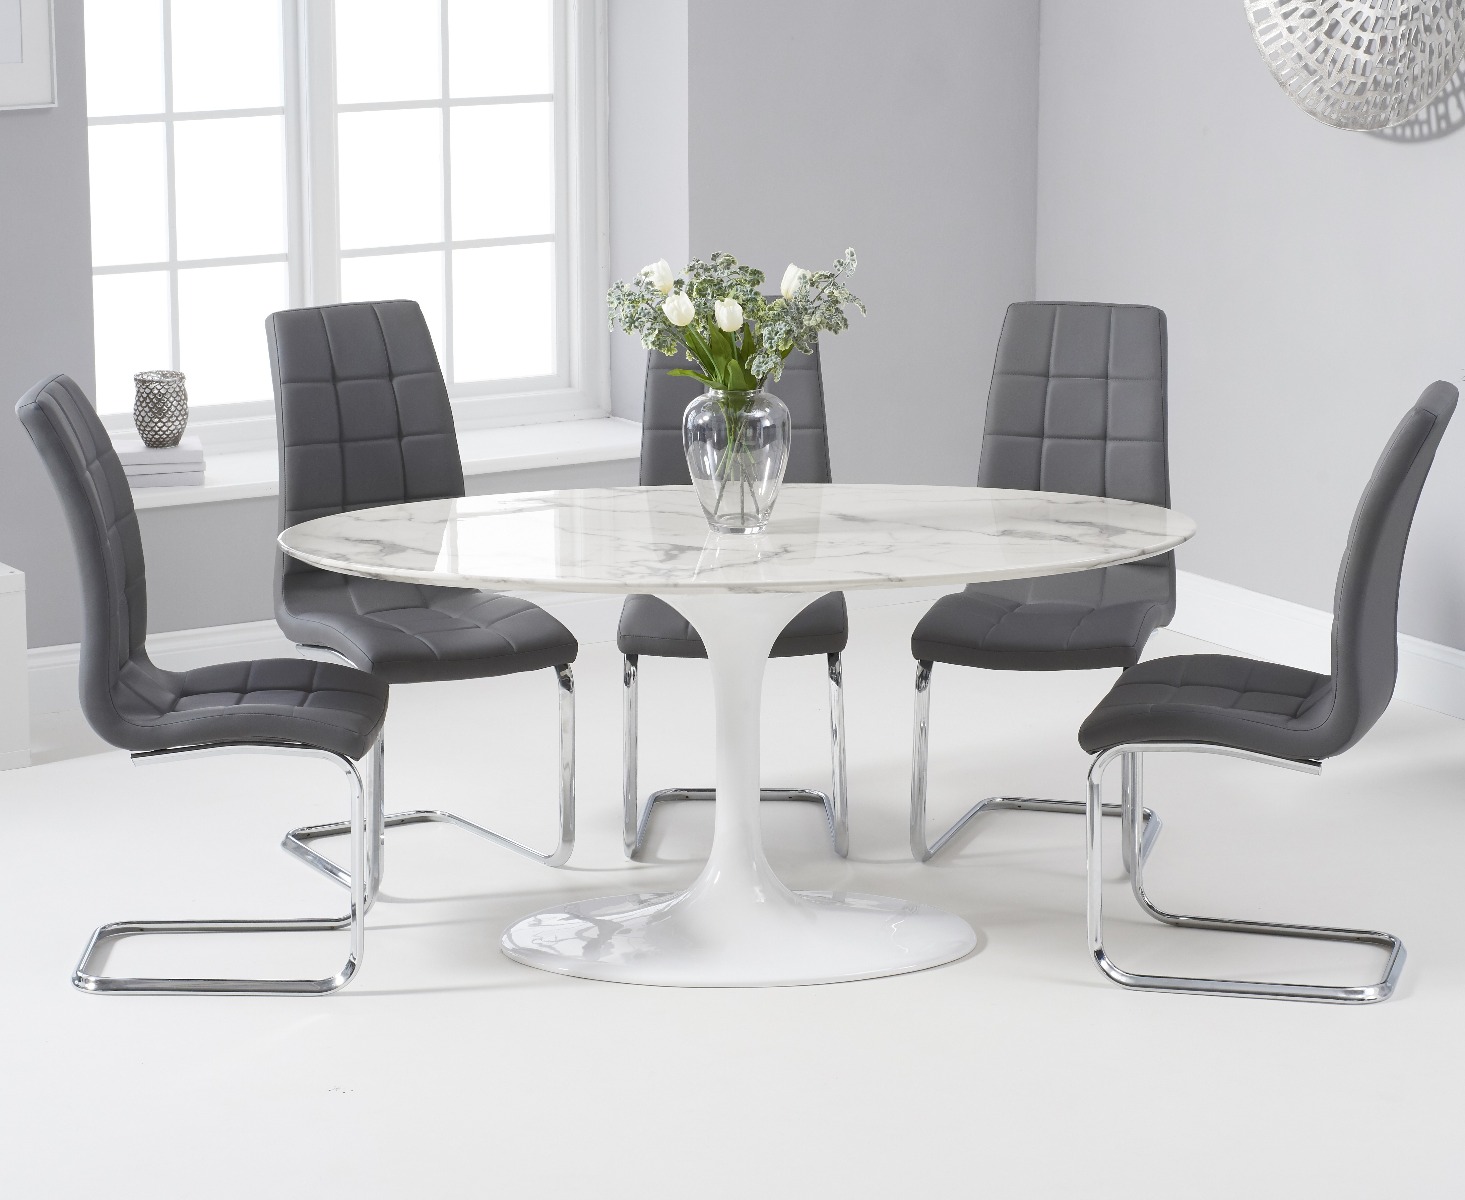 Brighton 160cm Oval White Marble Dining Table With 8 Black Vigo Dining Chairs